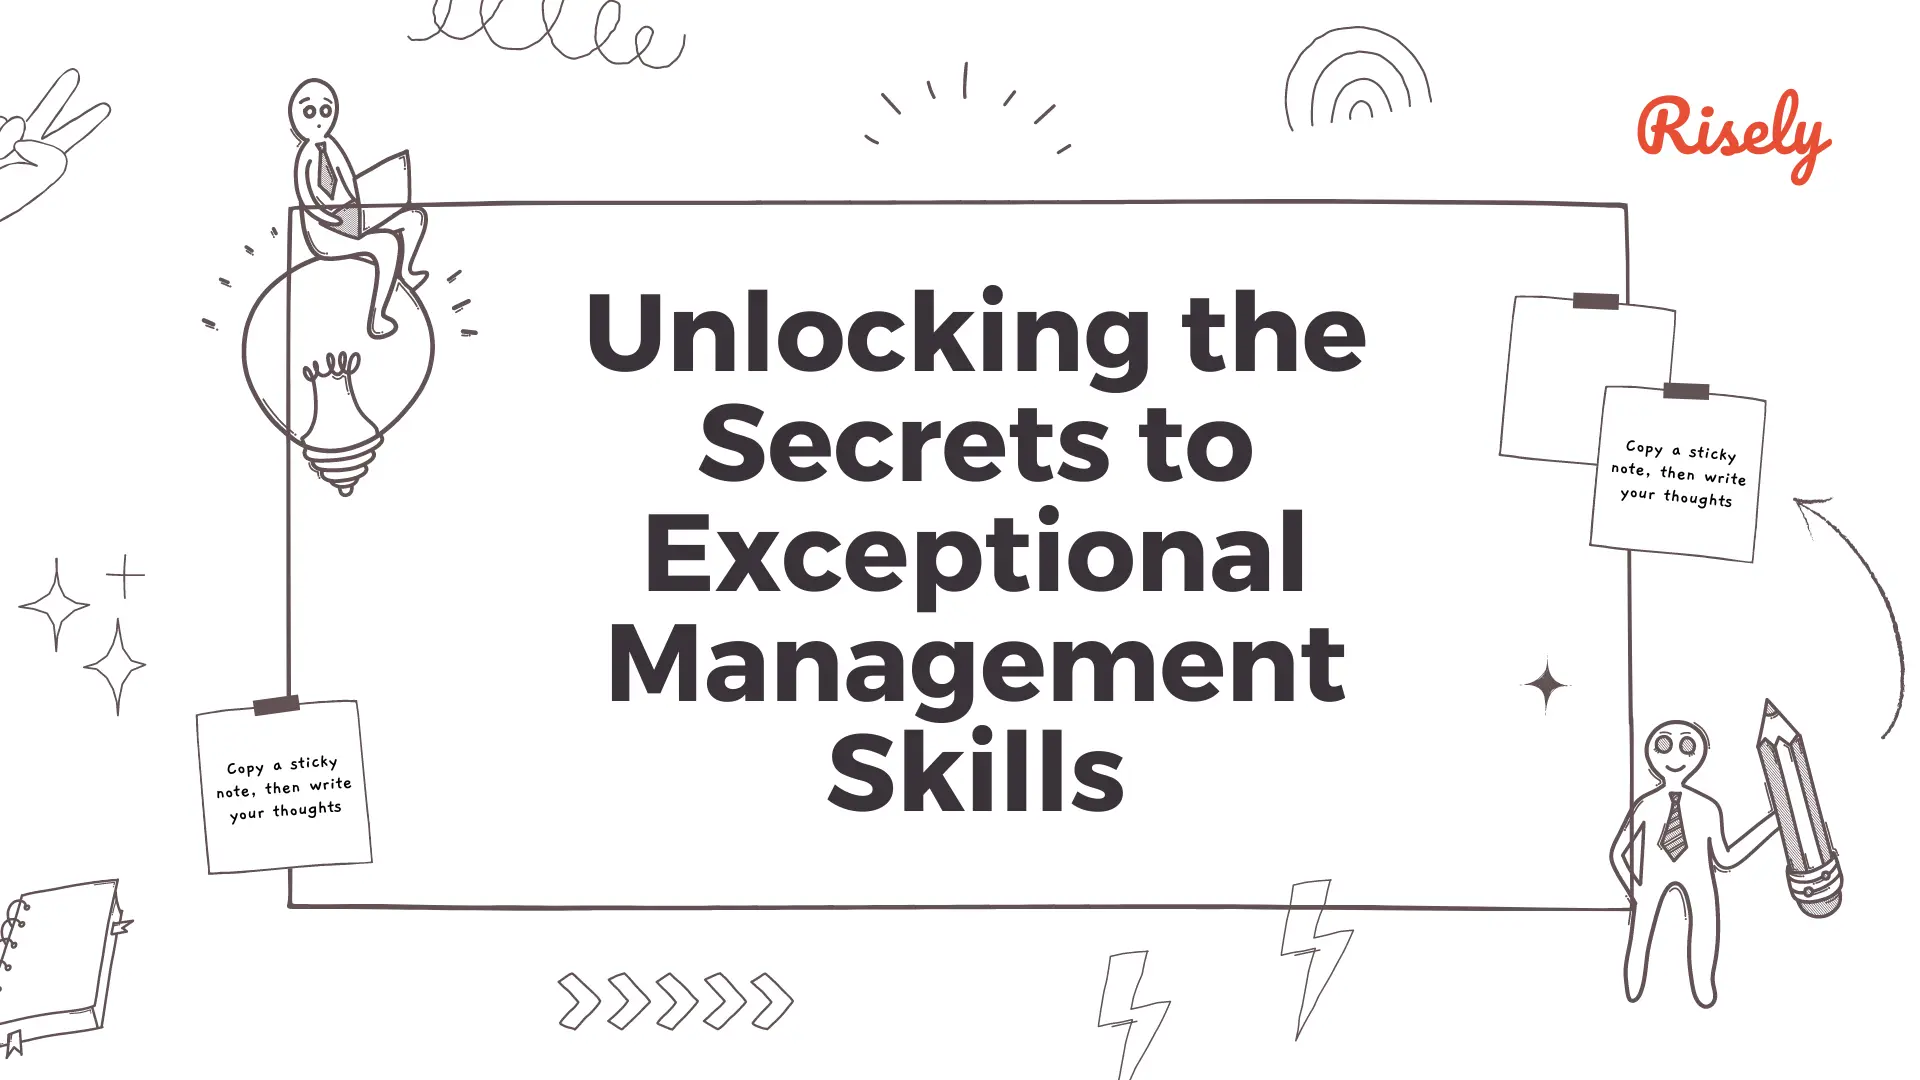 Unlocking the Secrets to Exceptional Management Skills